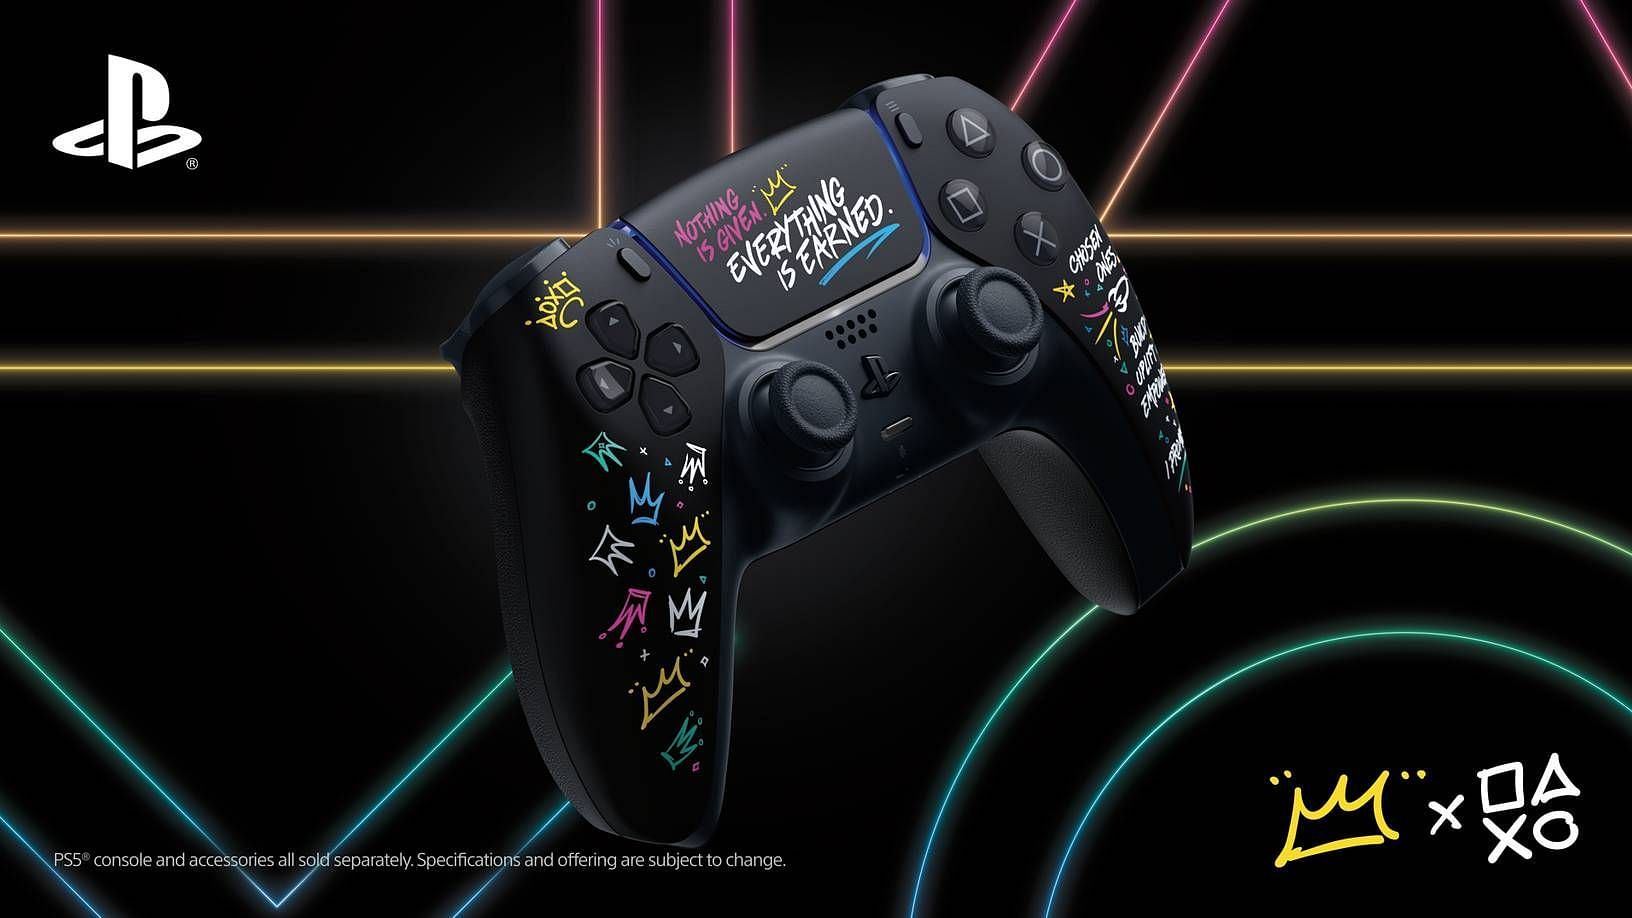 Details about the limited edition LeBron James PS5 controller